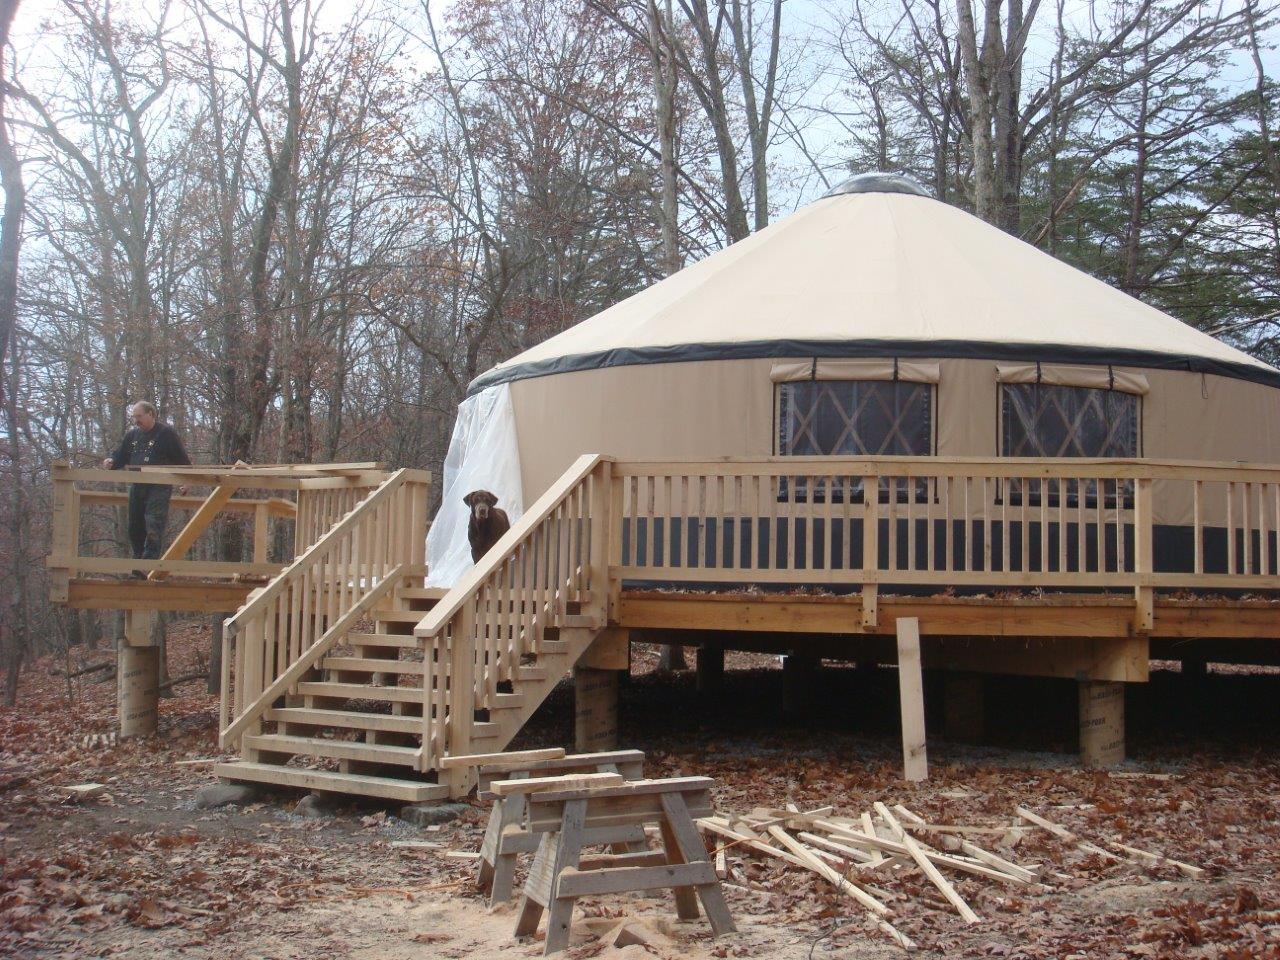 30ft yurt with side by side windows